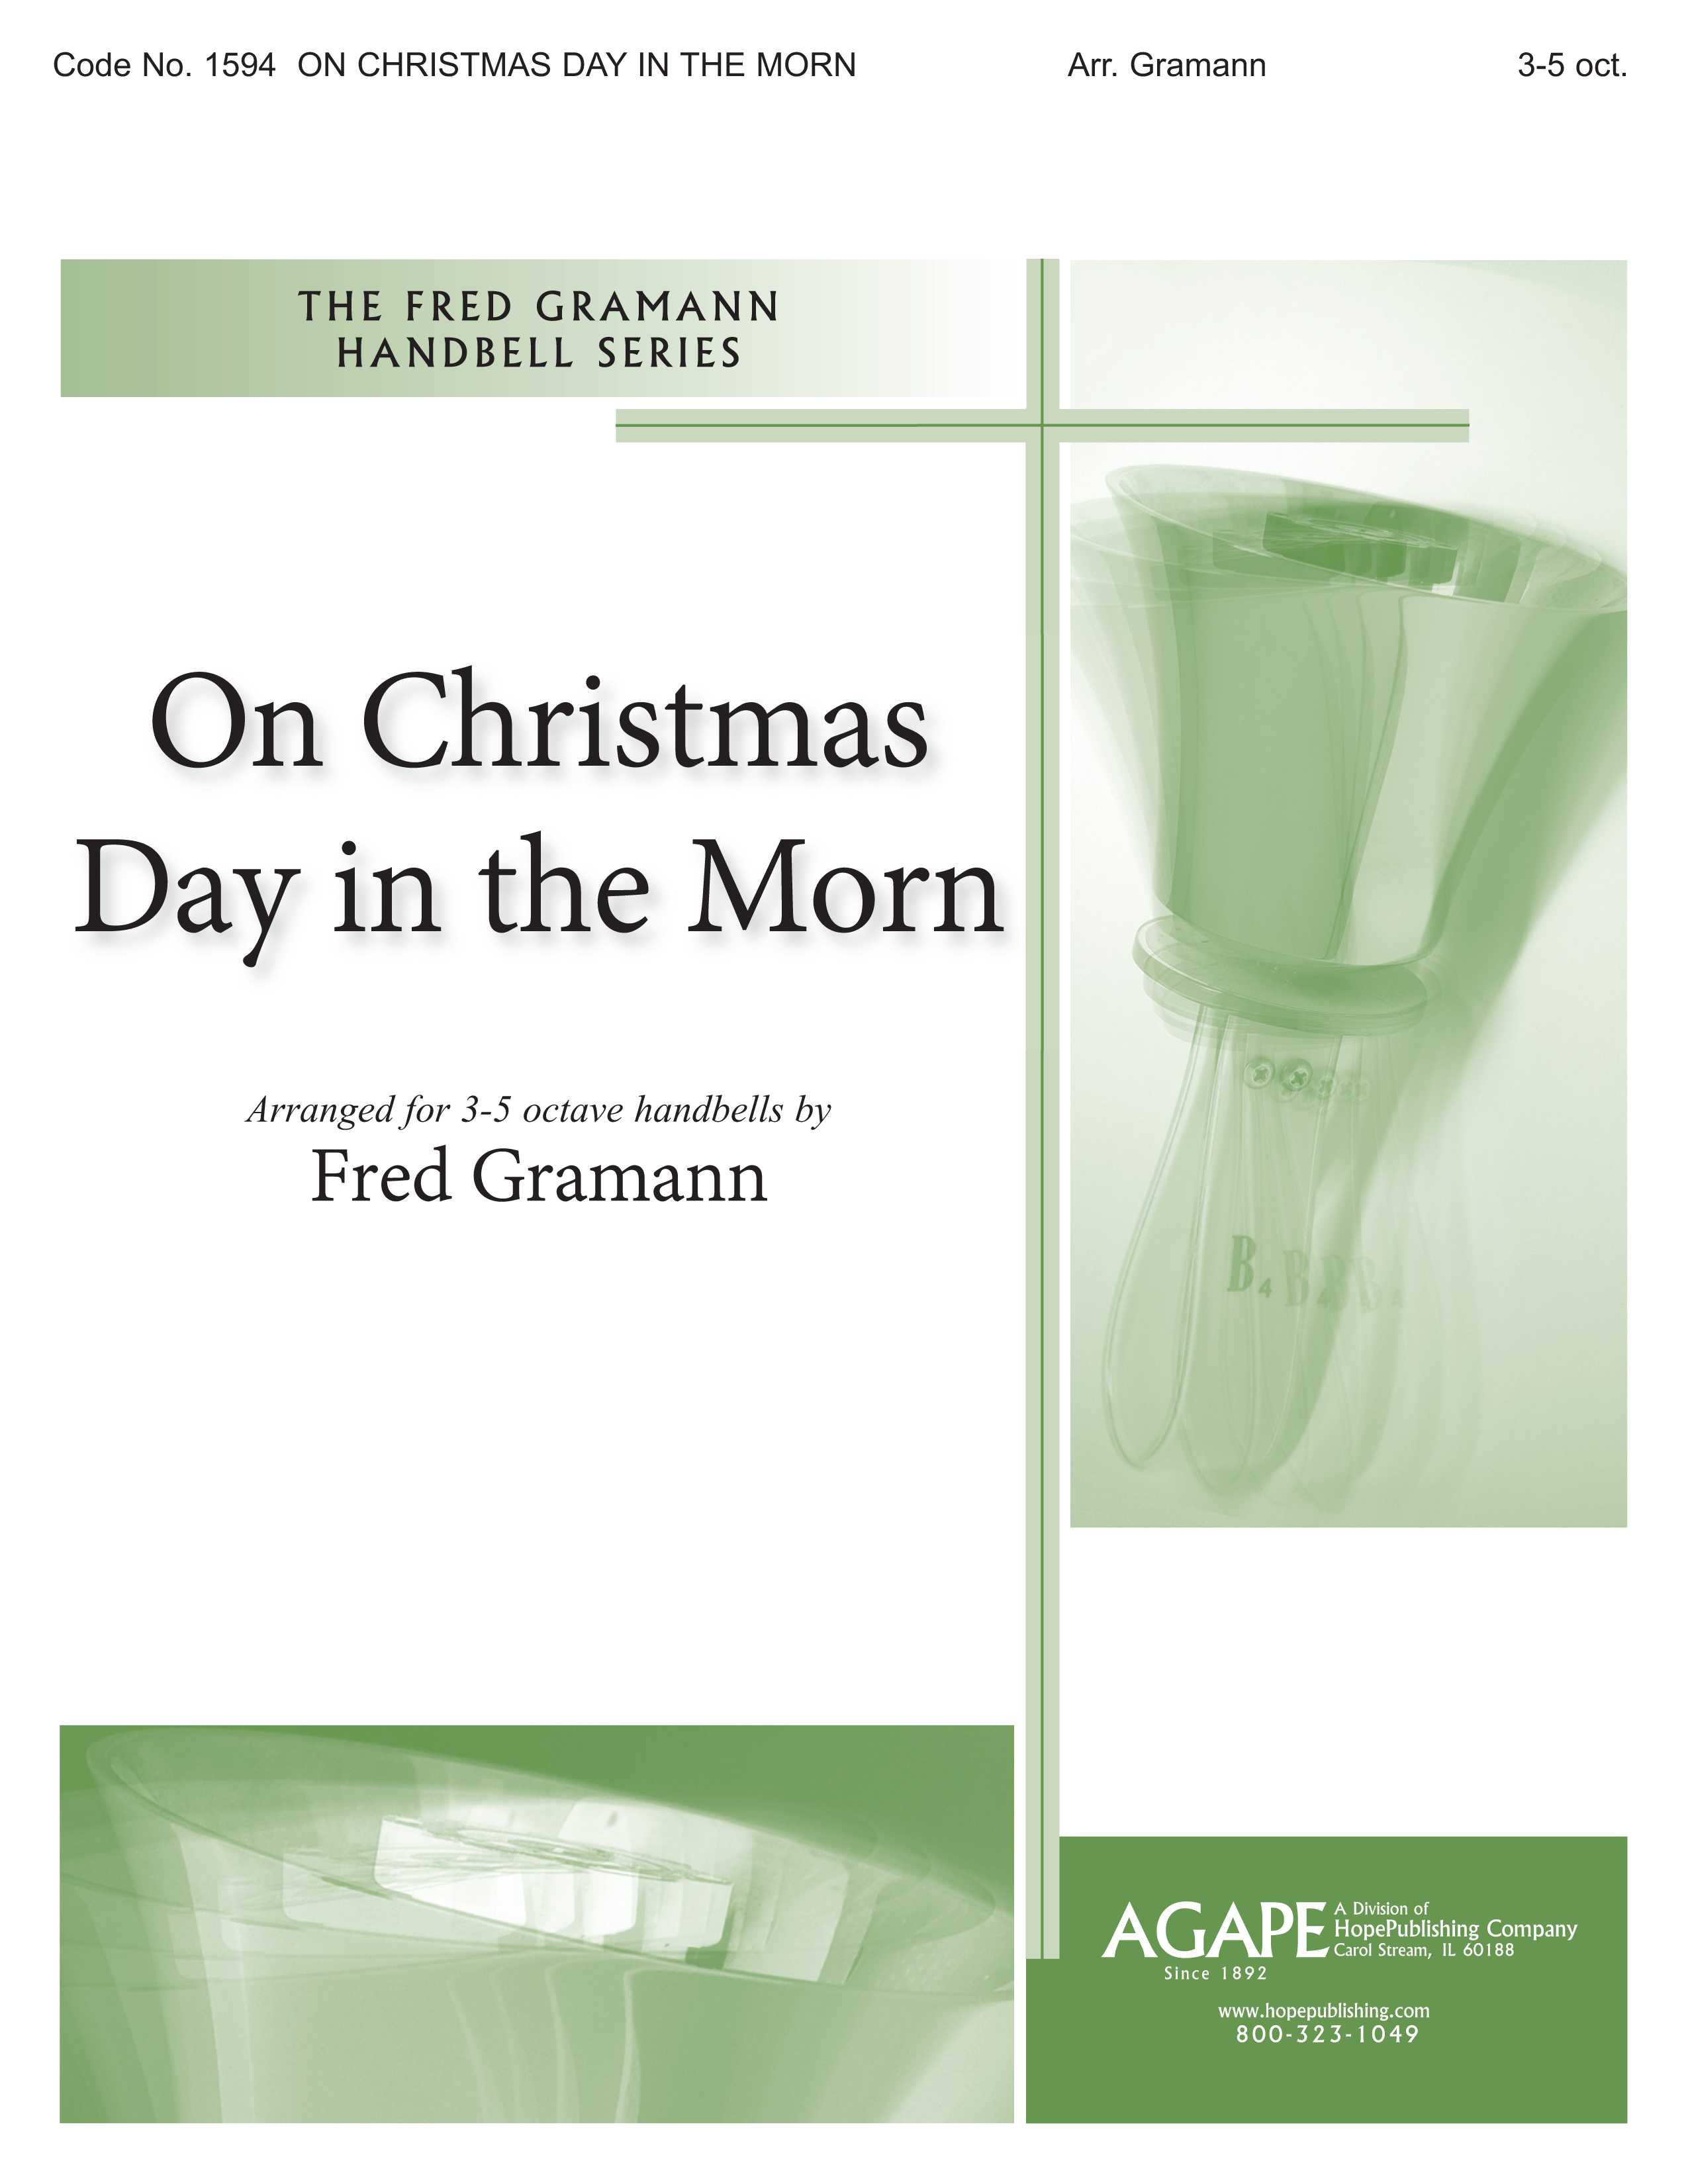 On Christmas Day in the Morn - 3-5 Octave Cover Image